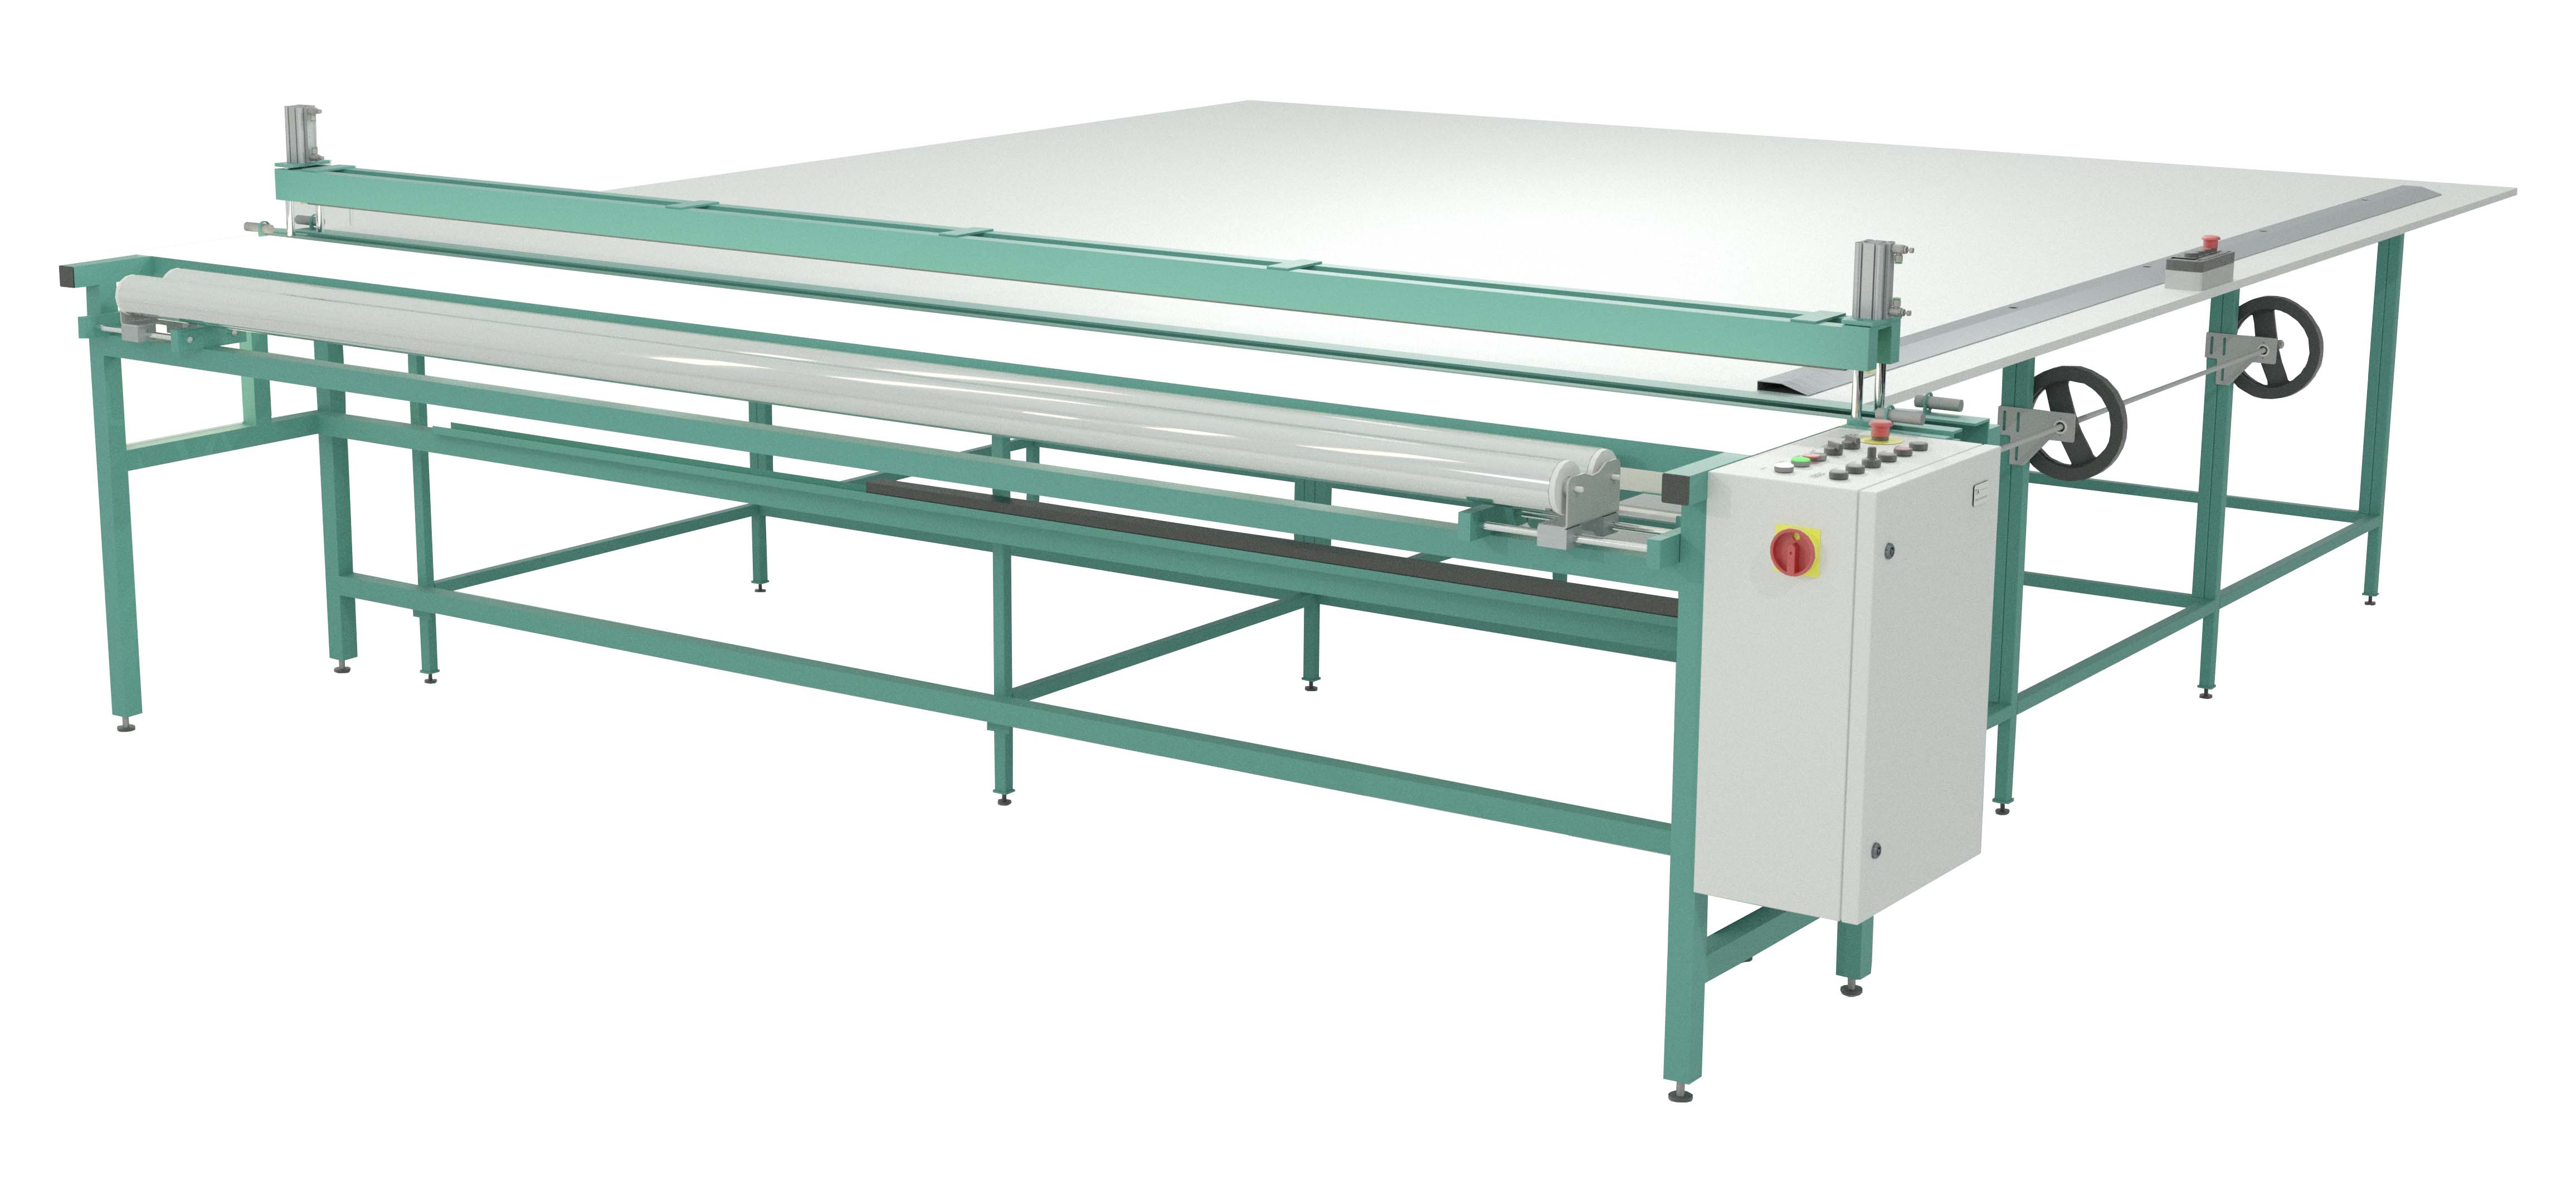 Professional fabric cutting table from TA | roll centering